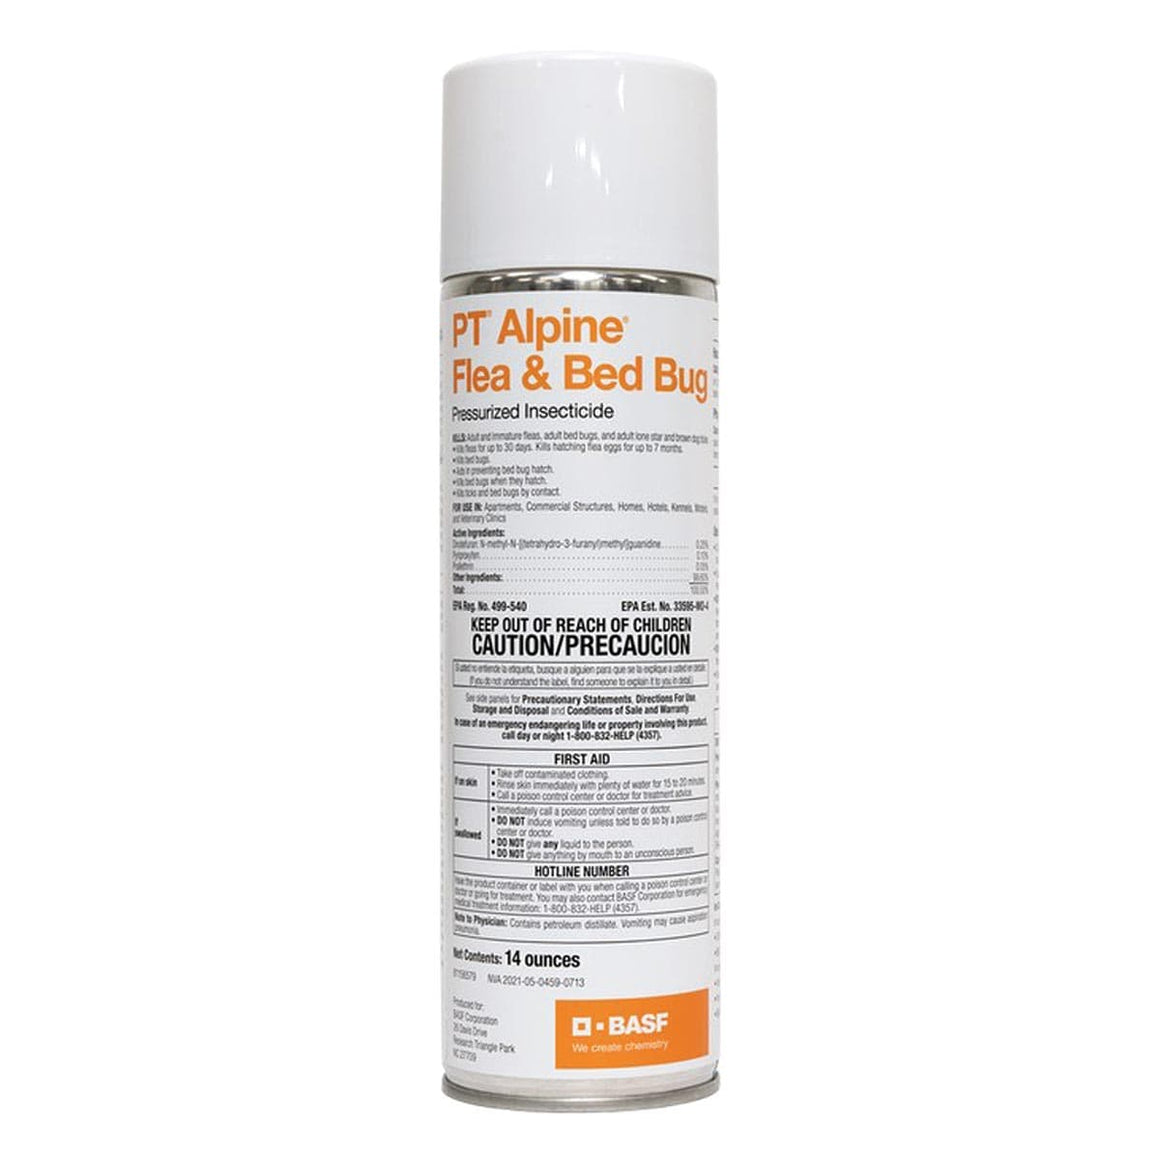 PT Alpine Flea and Bed Bug Insecticide - 14 Oz. - Seed World